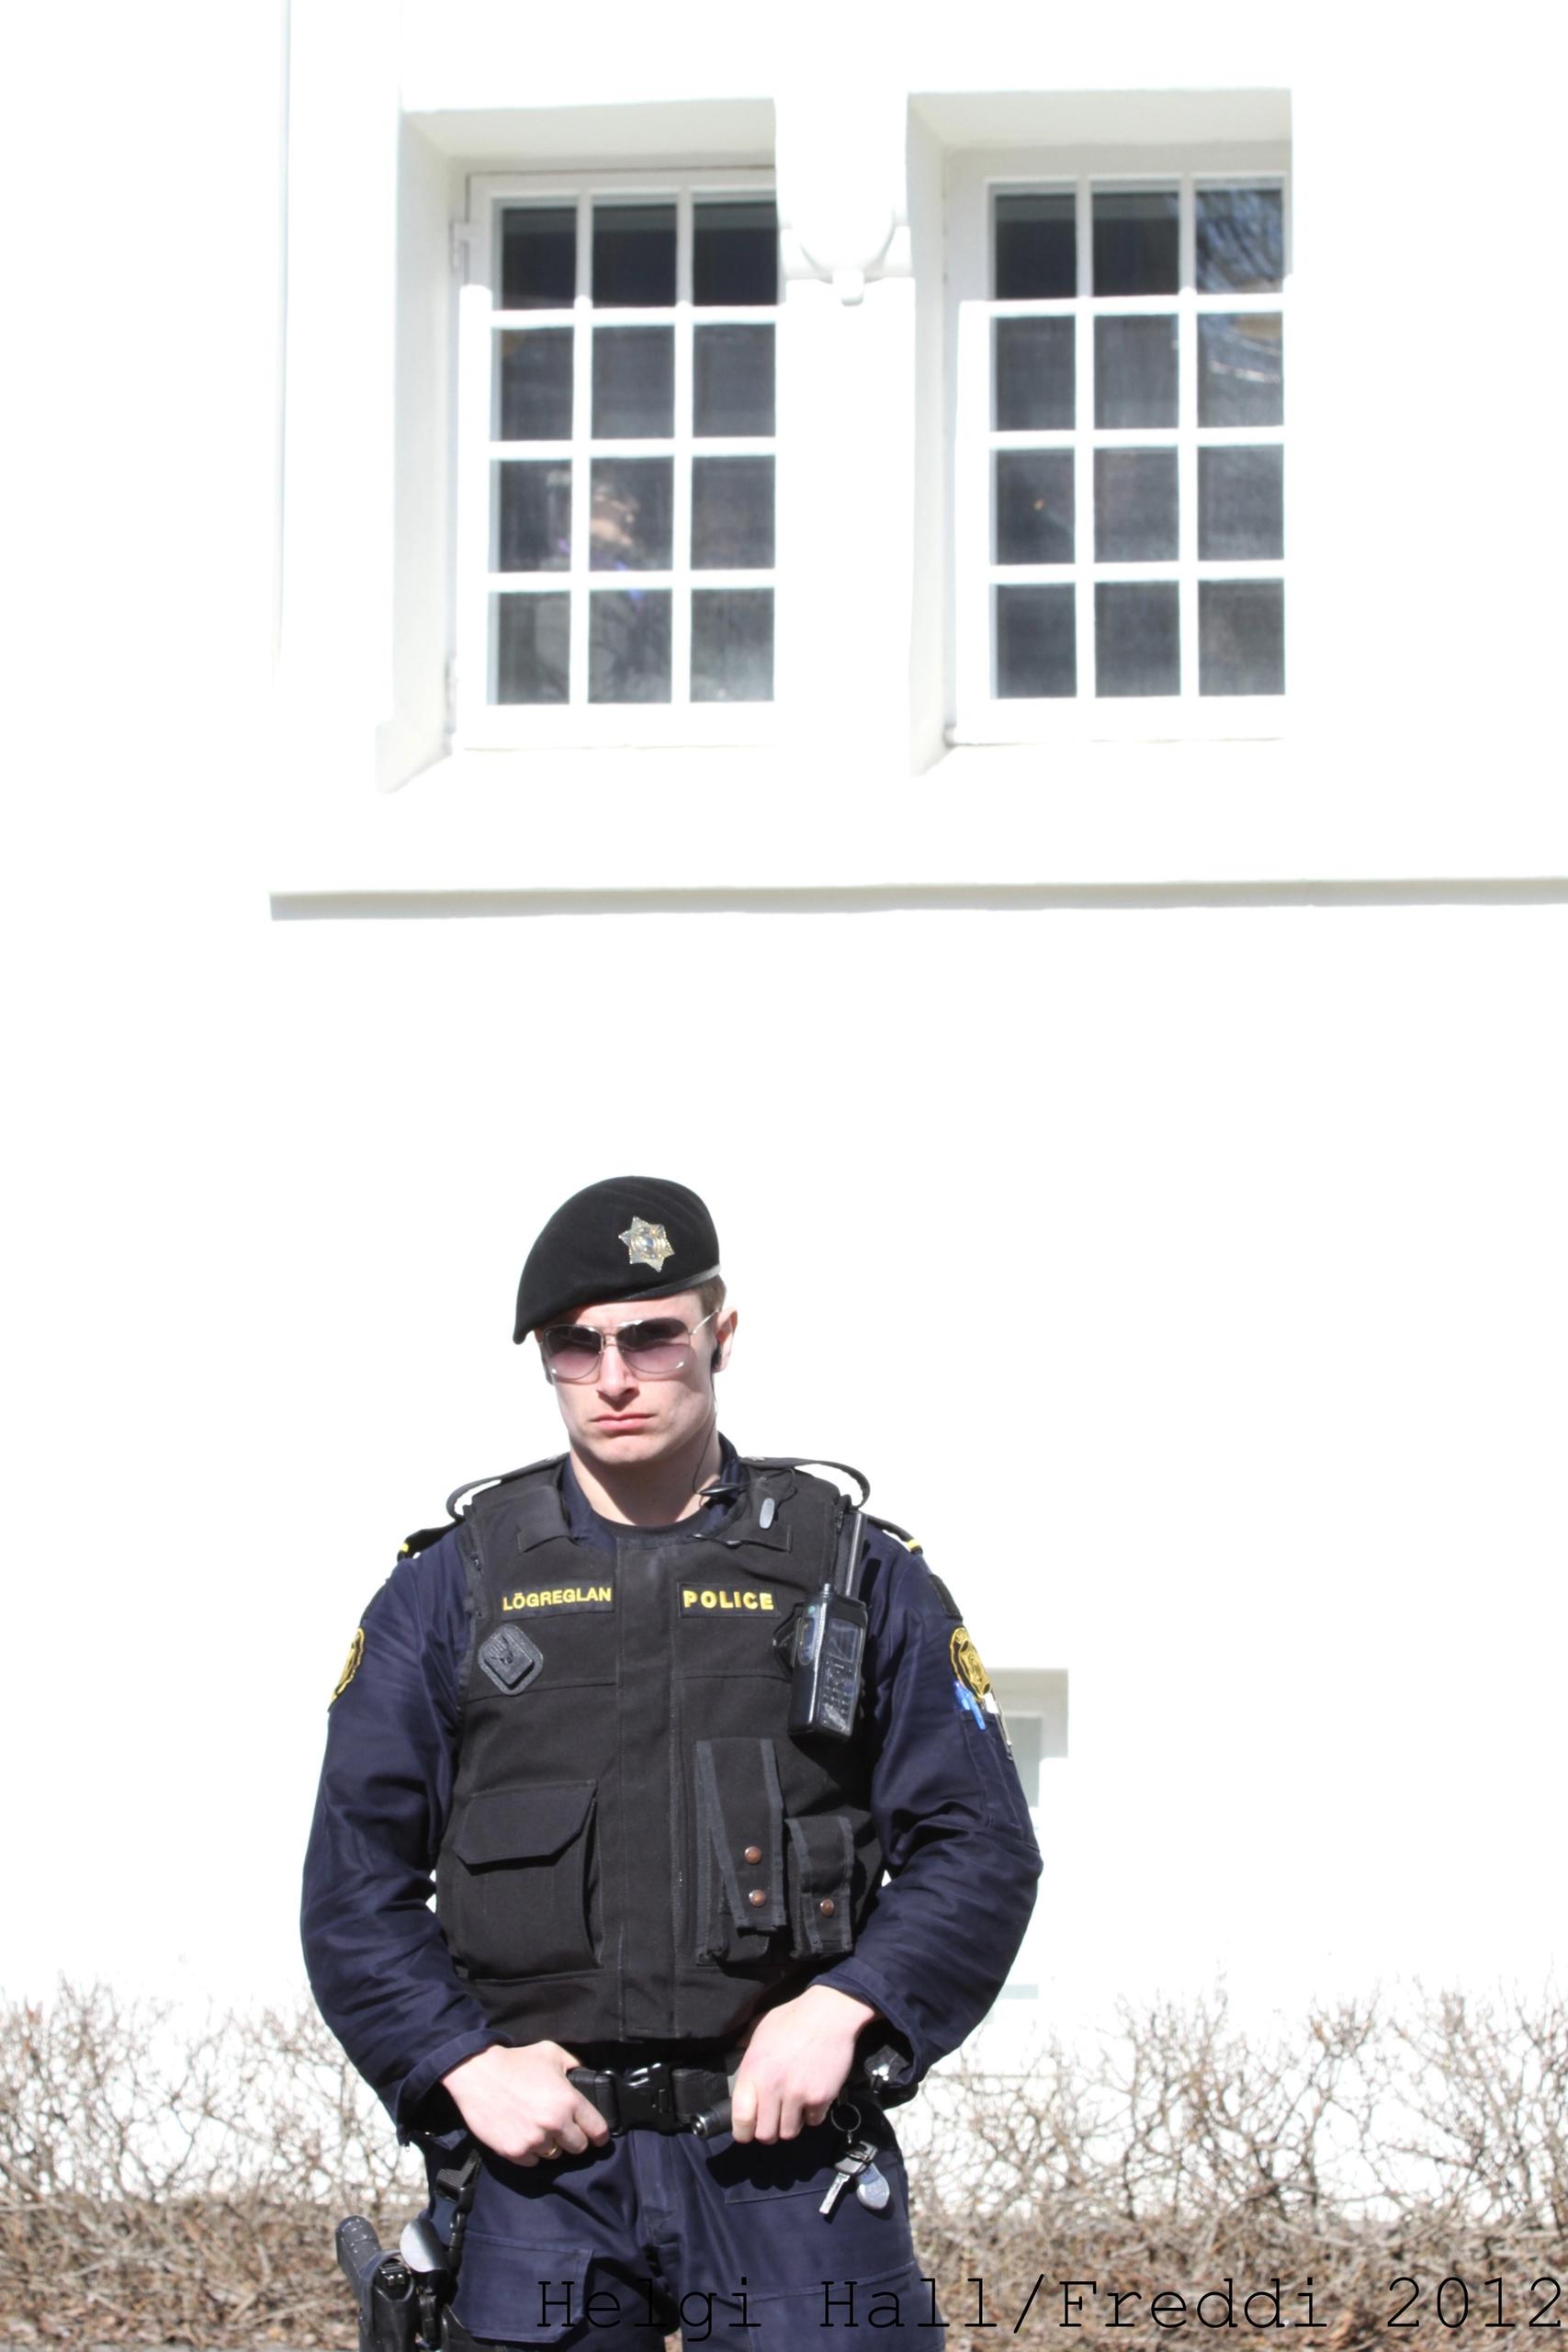 An armed officer from the SWAT Viking Squad in 2012